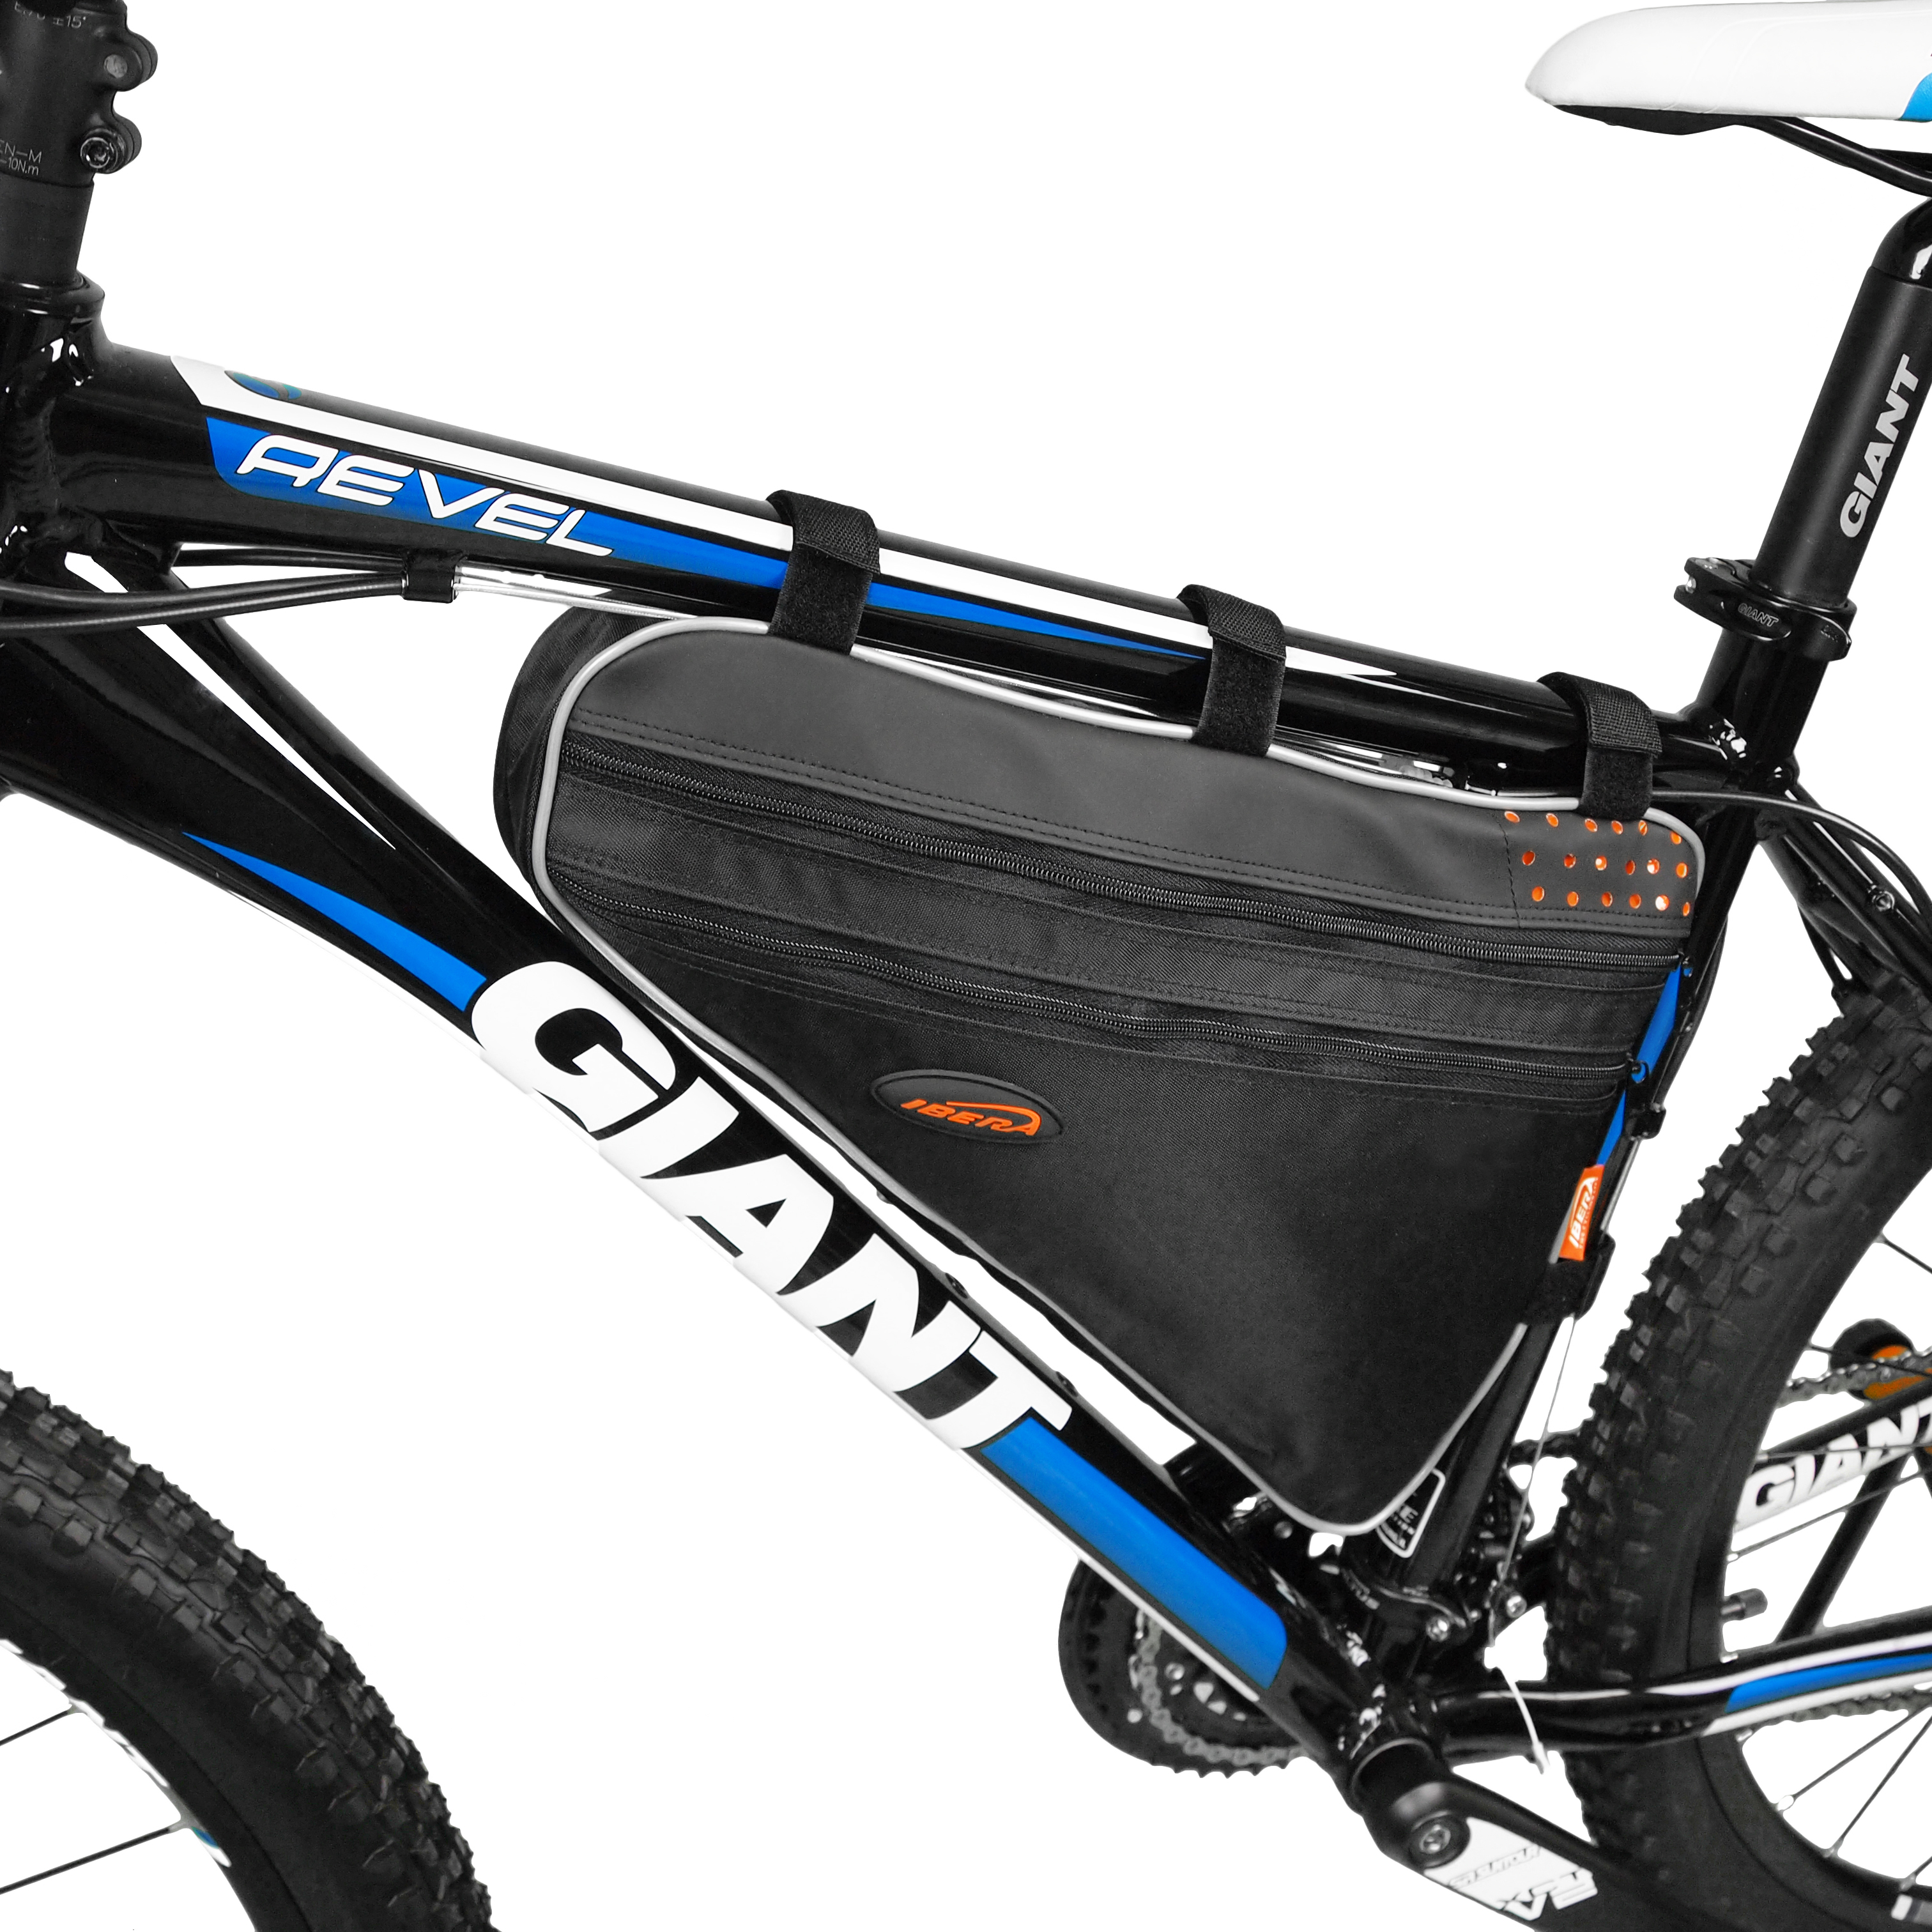 Side View of Bag Attached to Bike